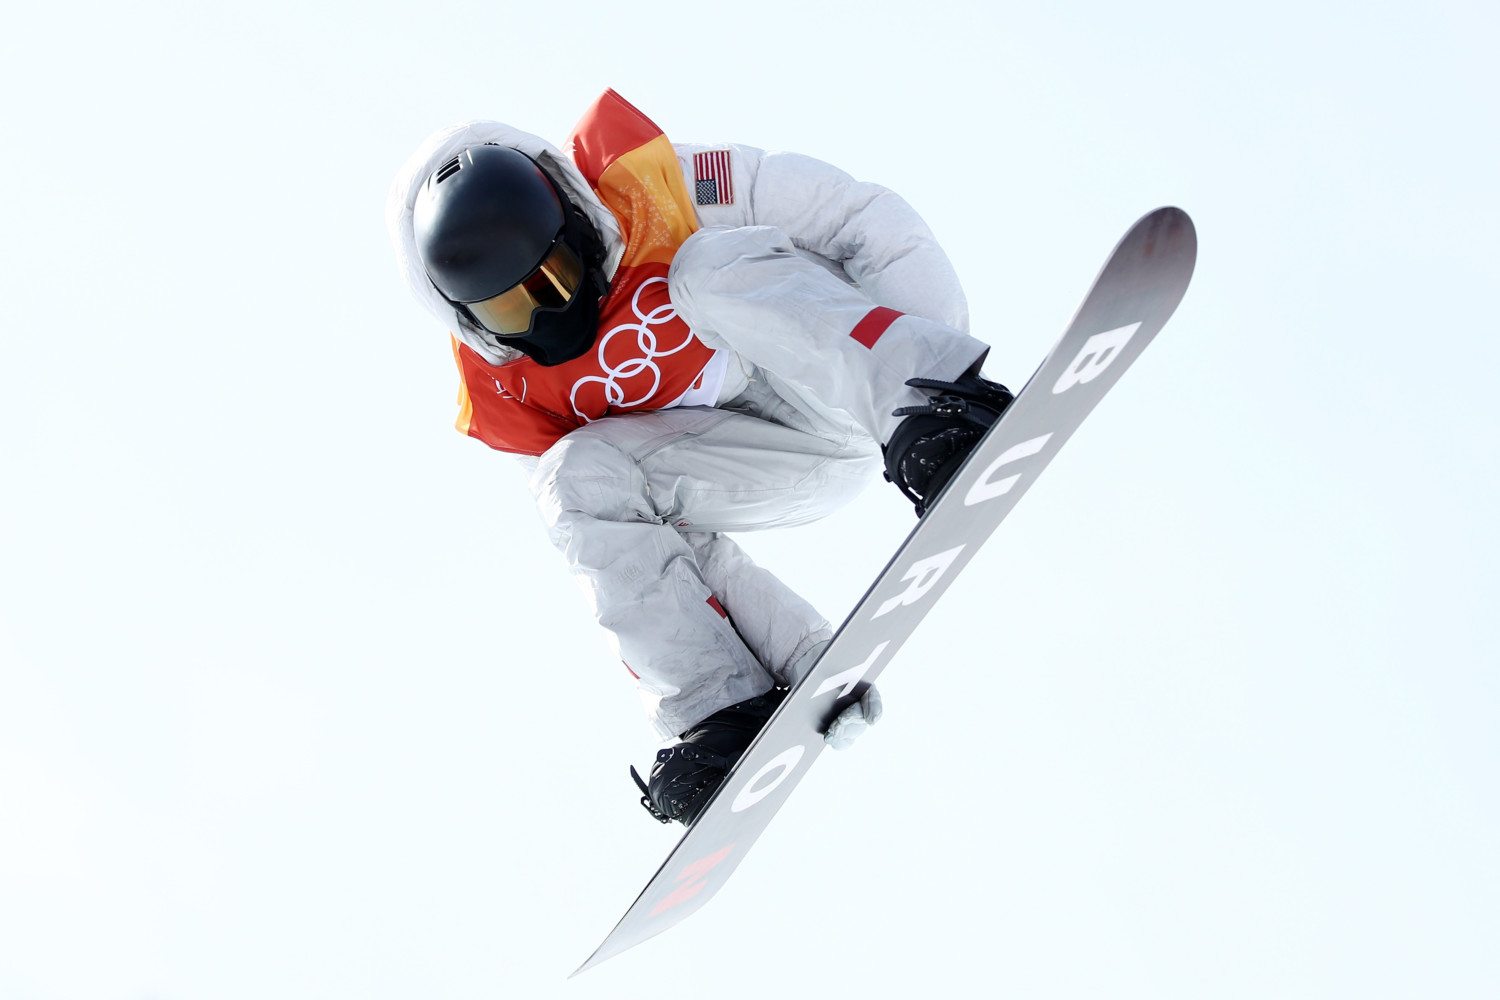 What To Know About Winter Olympic Snowboarder Shaun White – NBC Boston